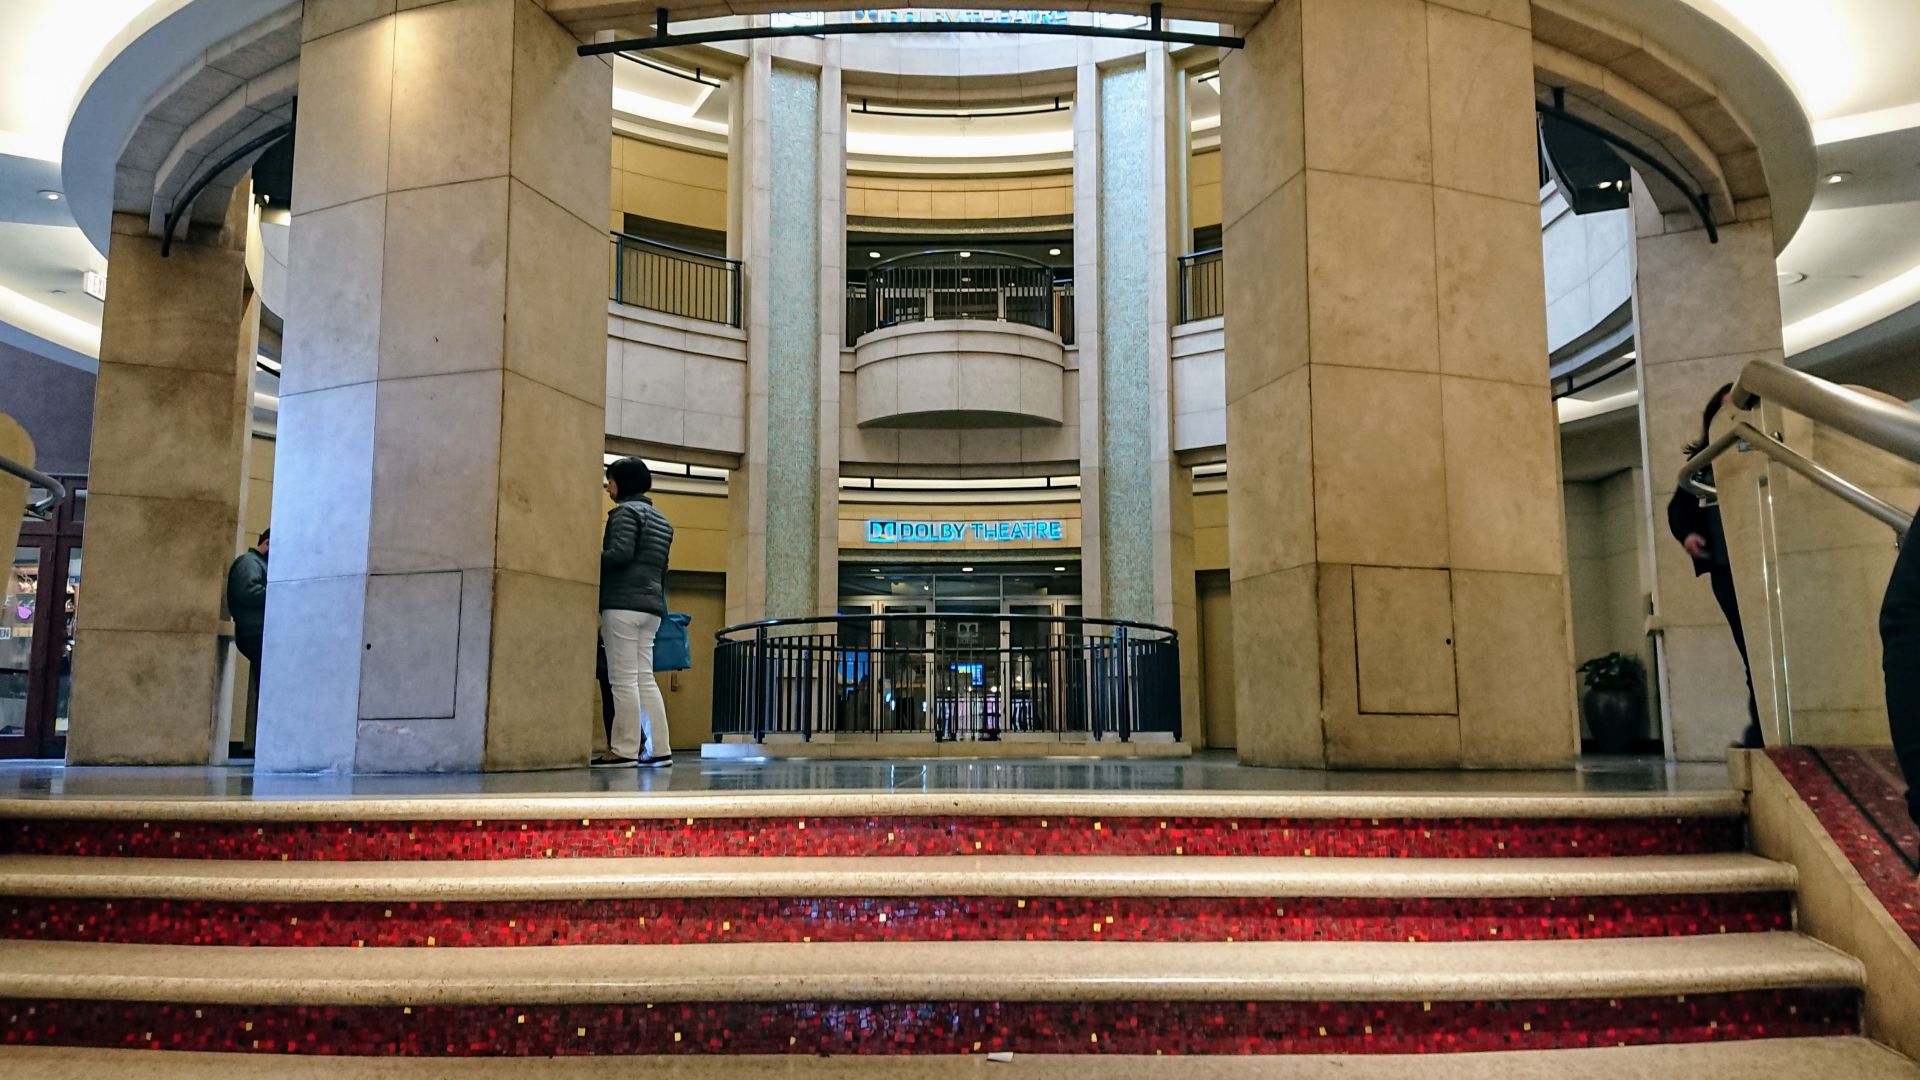 Los Angeles, CA - Dolby Theatre